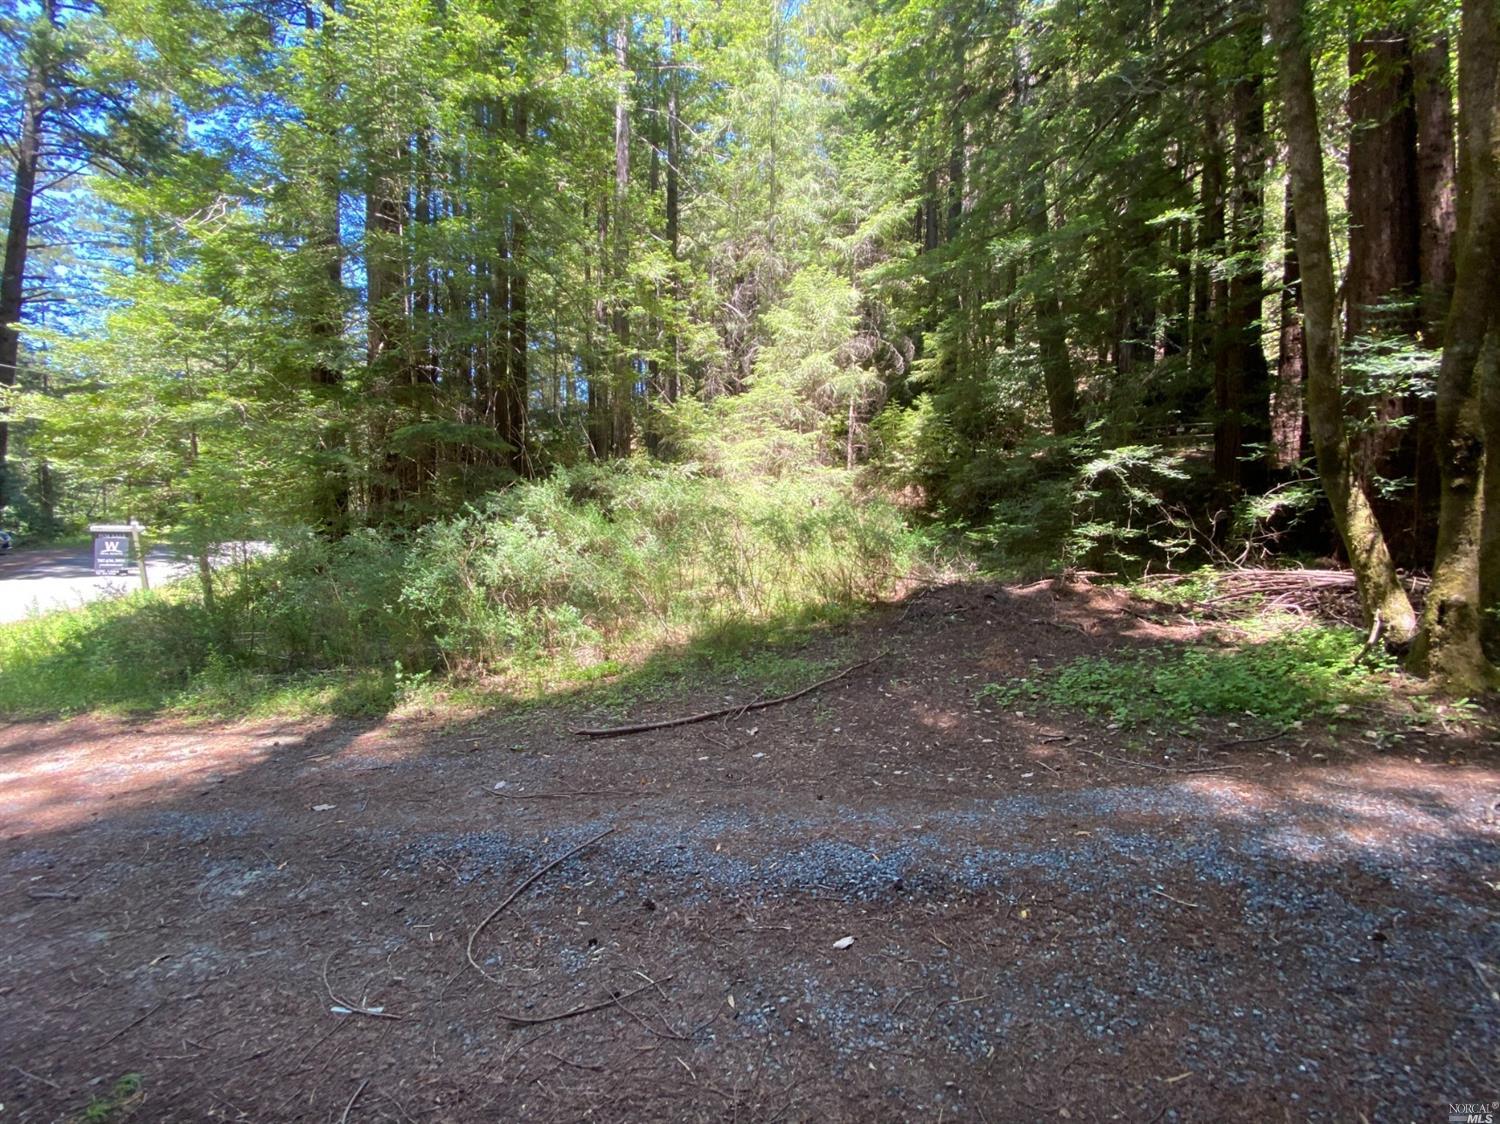 a view of a dirt road with large trees